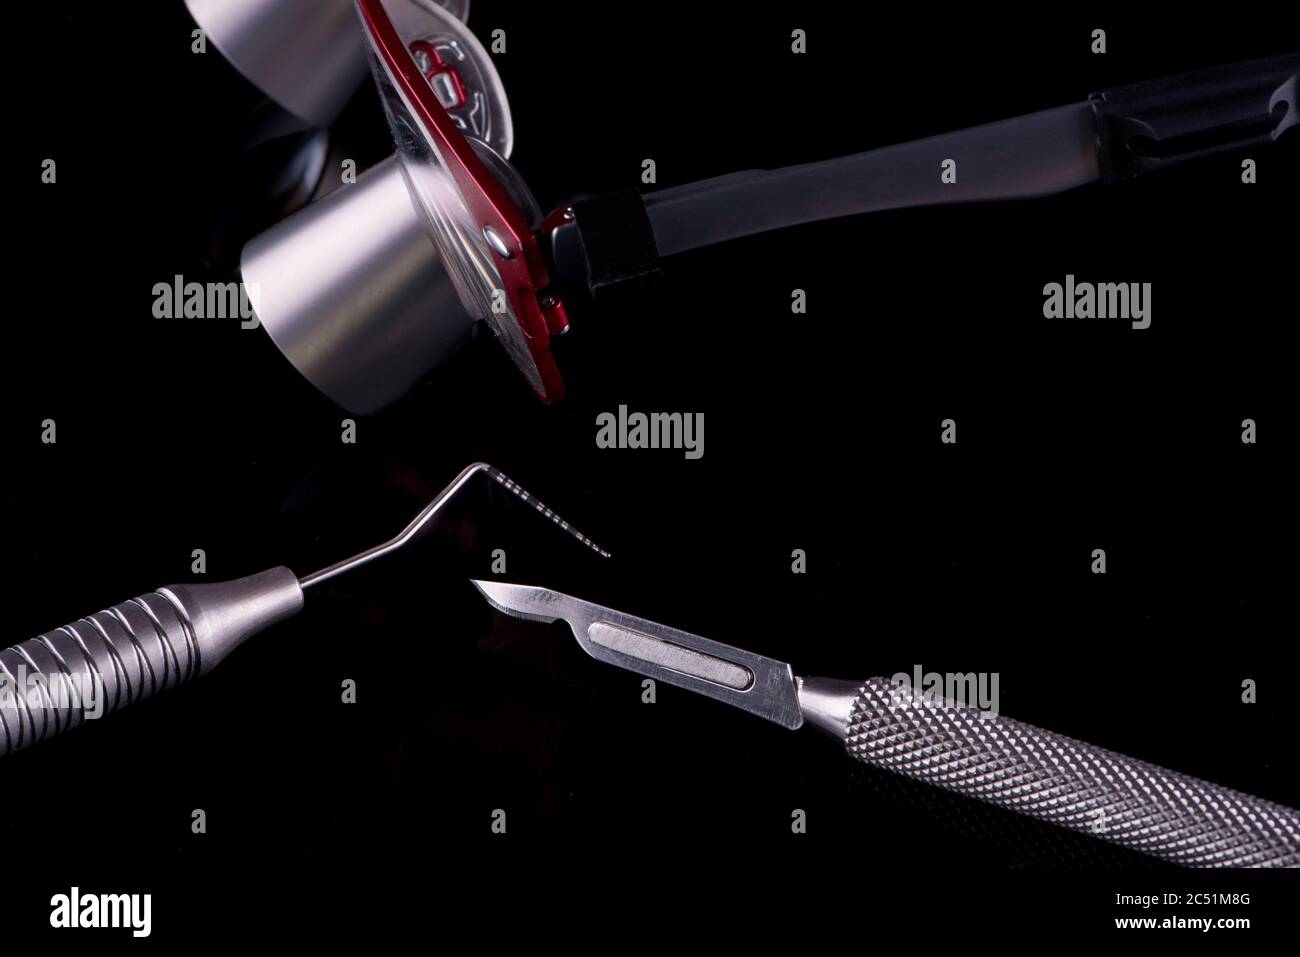 Horizontal color image with a front view of a professional dental tools on a black background Periodontal probe, scalpel and magnifying glasses. Stock Photo